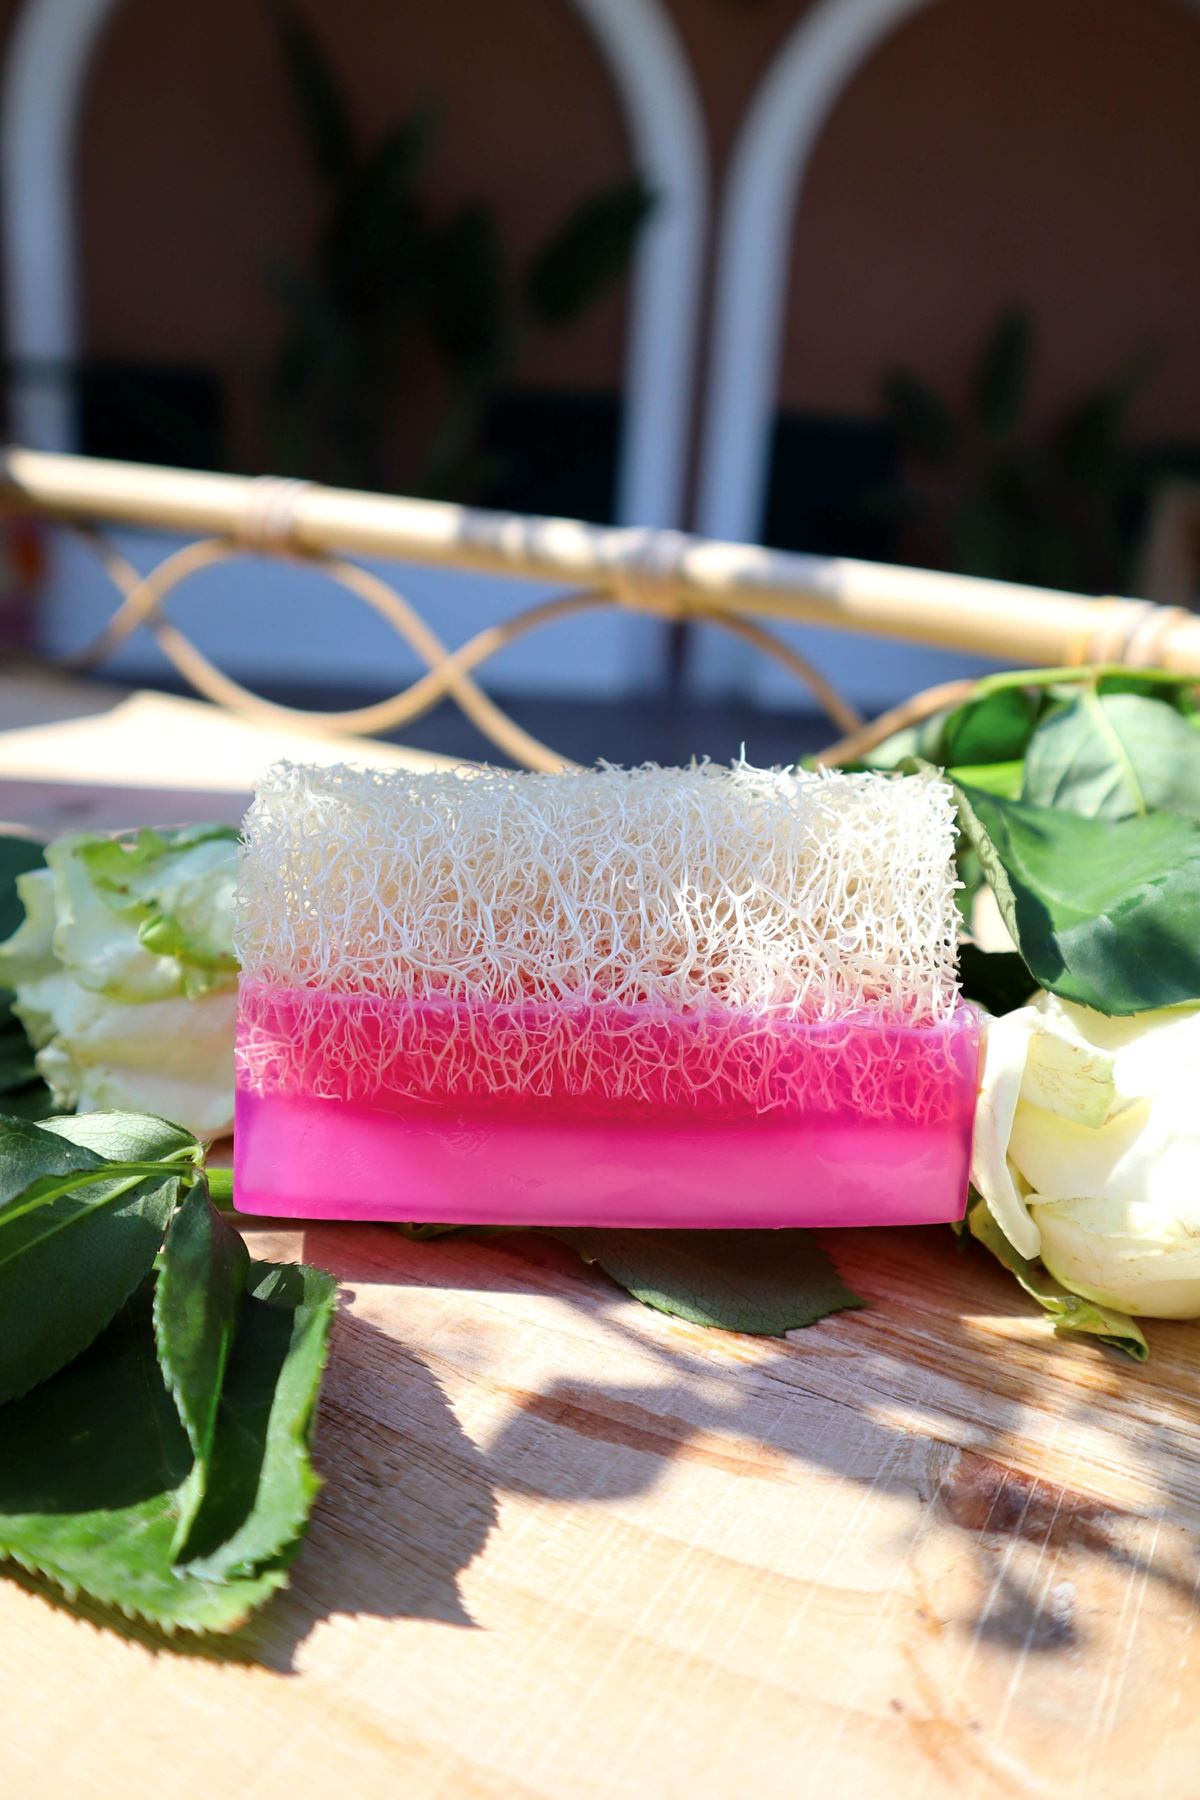 Rose Soap with Loofah